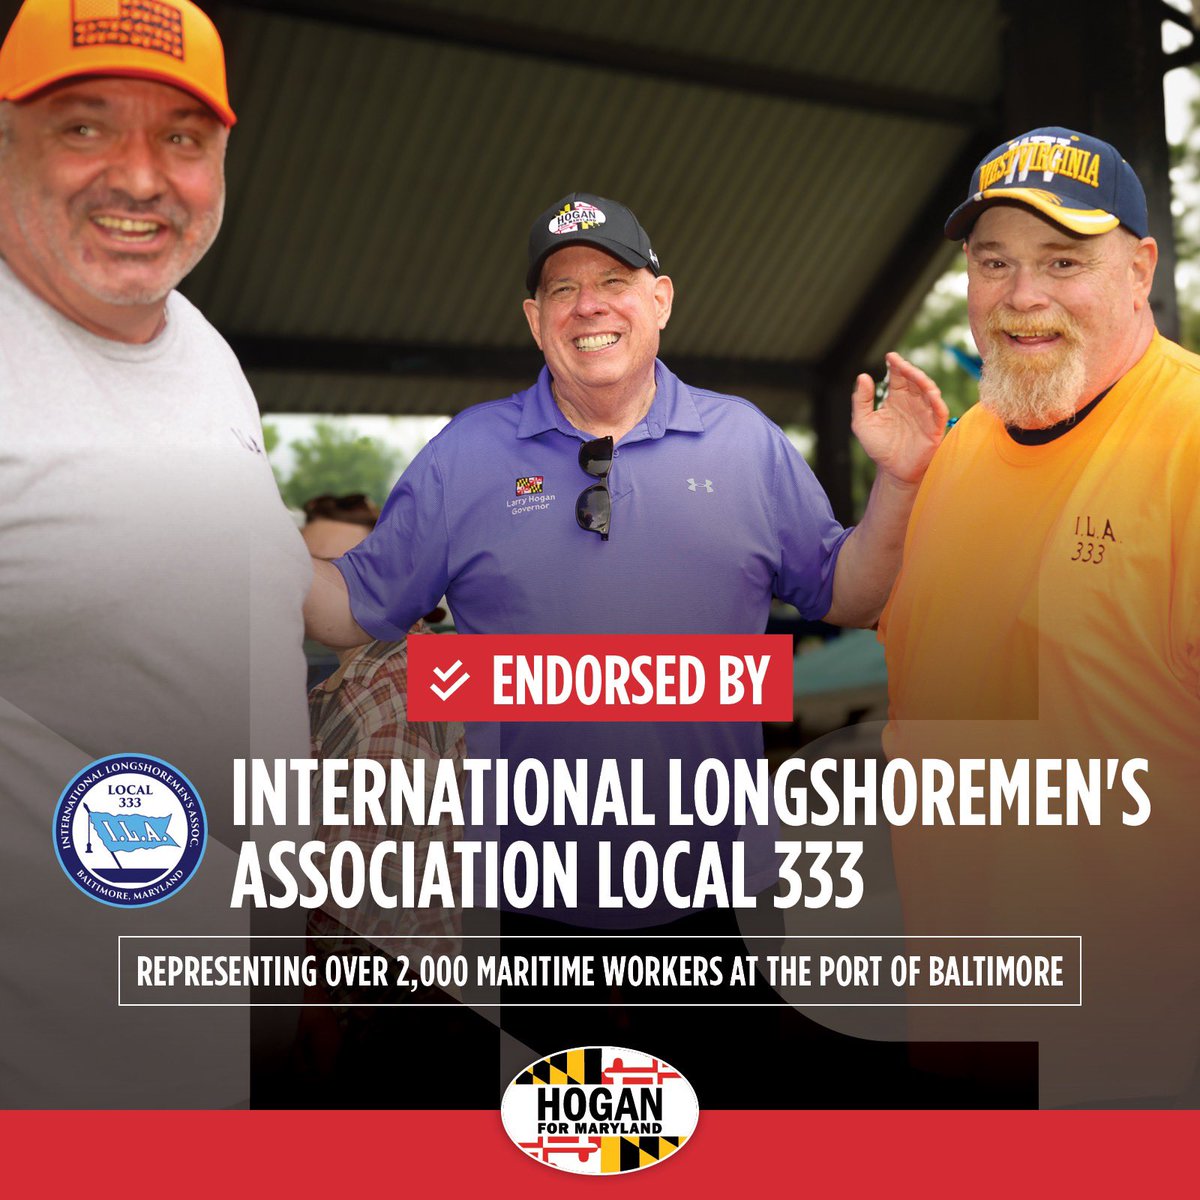 I am truly humbled to receive the endorsement of International Longshoremen’s Association Local 333, which represents thousands of maritime workers at the Port of Baltimore. The longshoremen know that I always had their backs as governor, and that’s exactly what I’ll do in the